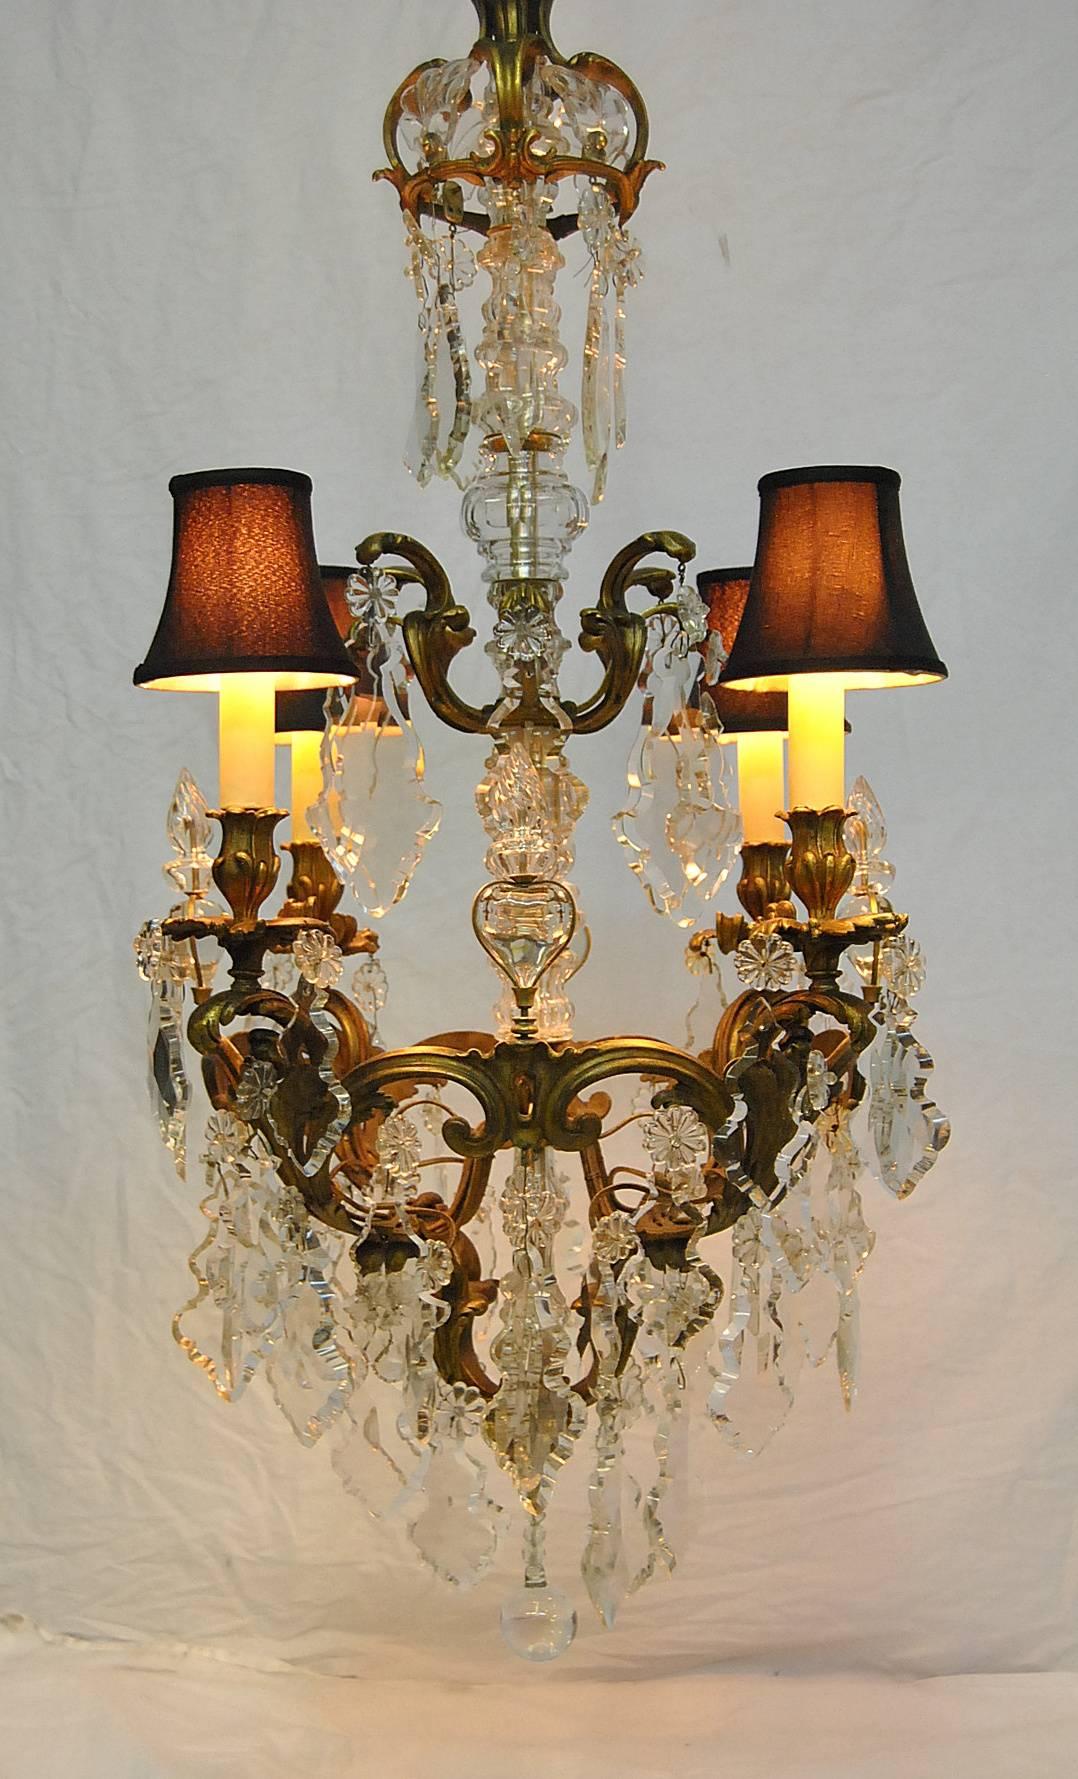 A beautiful large-scale French bronze chandelier with large shaped cut crystal accents. This chandelier is 43